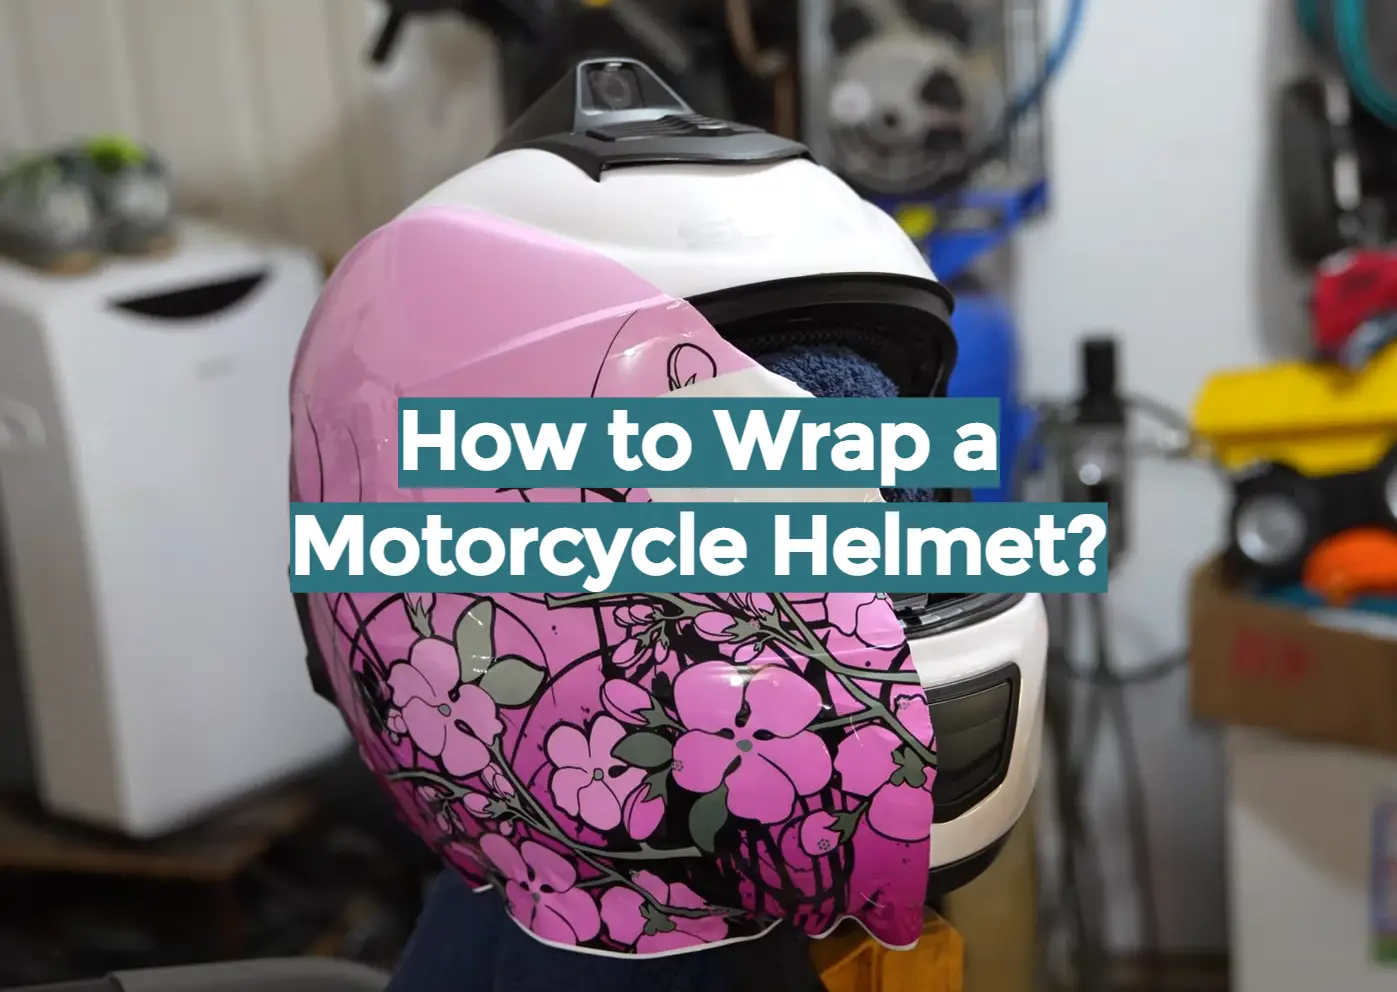 How to Wrap a Motorcycle Helmet?